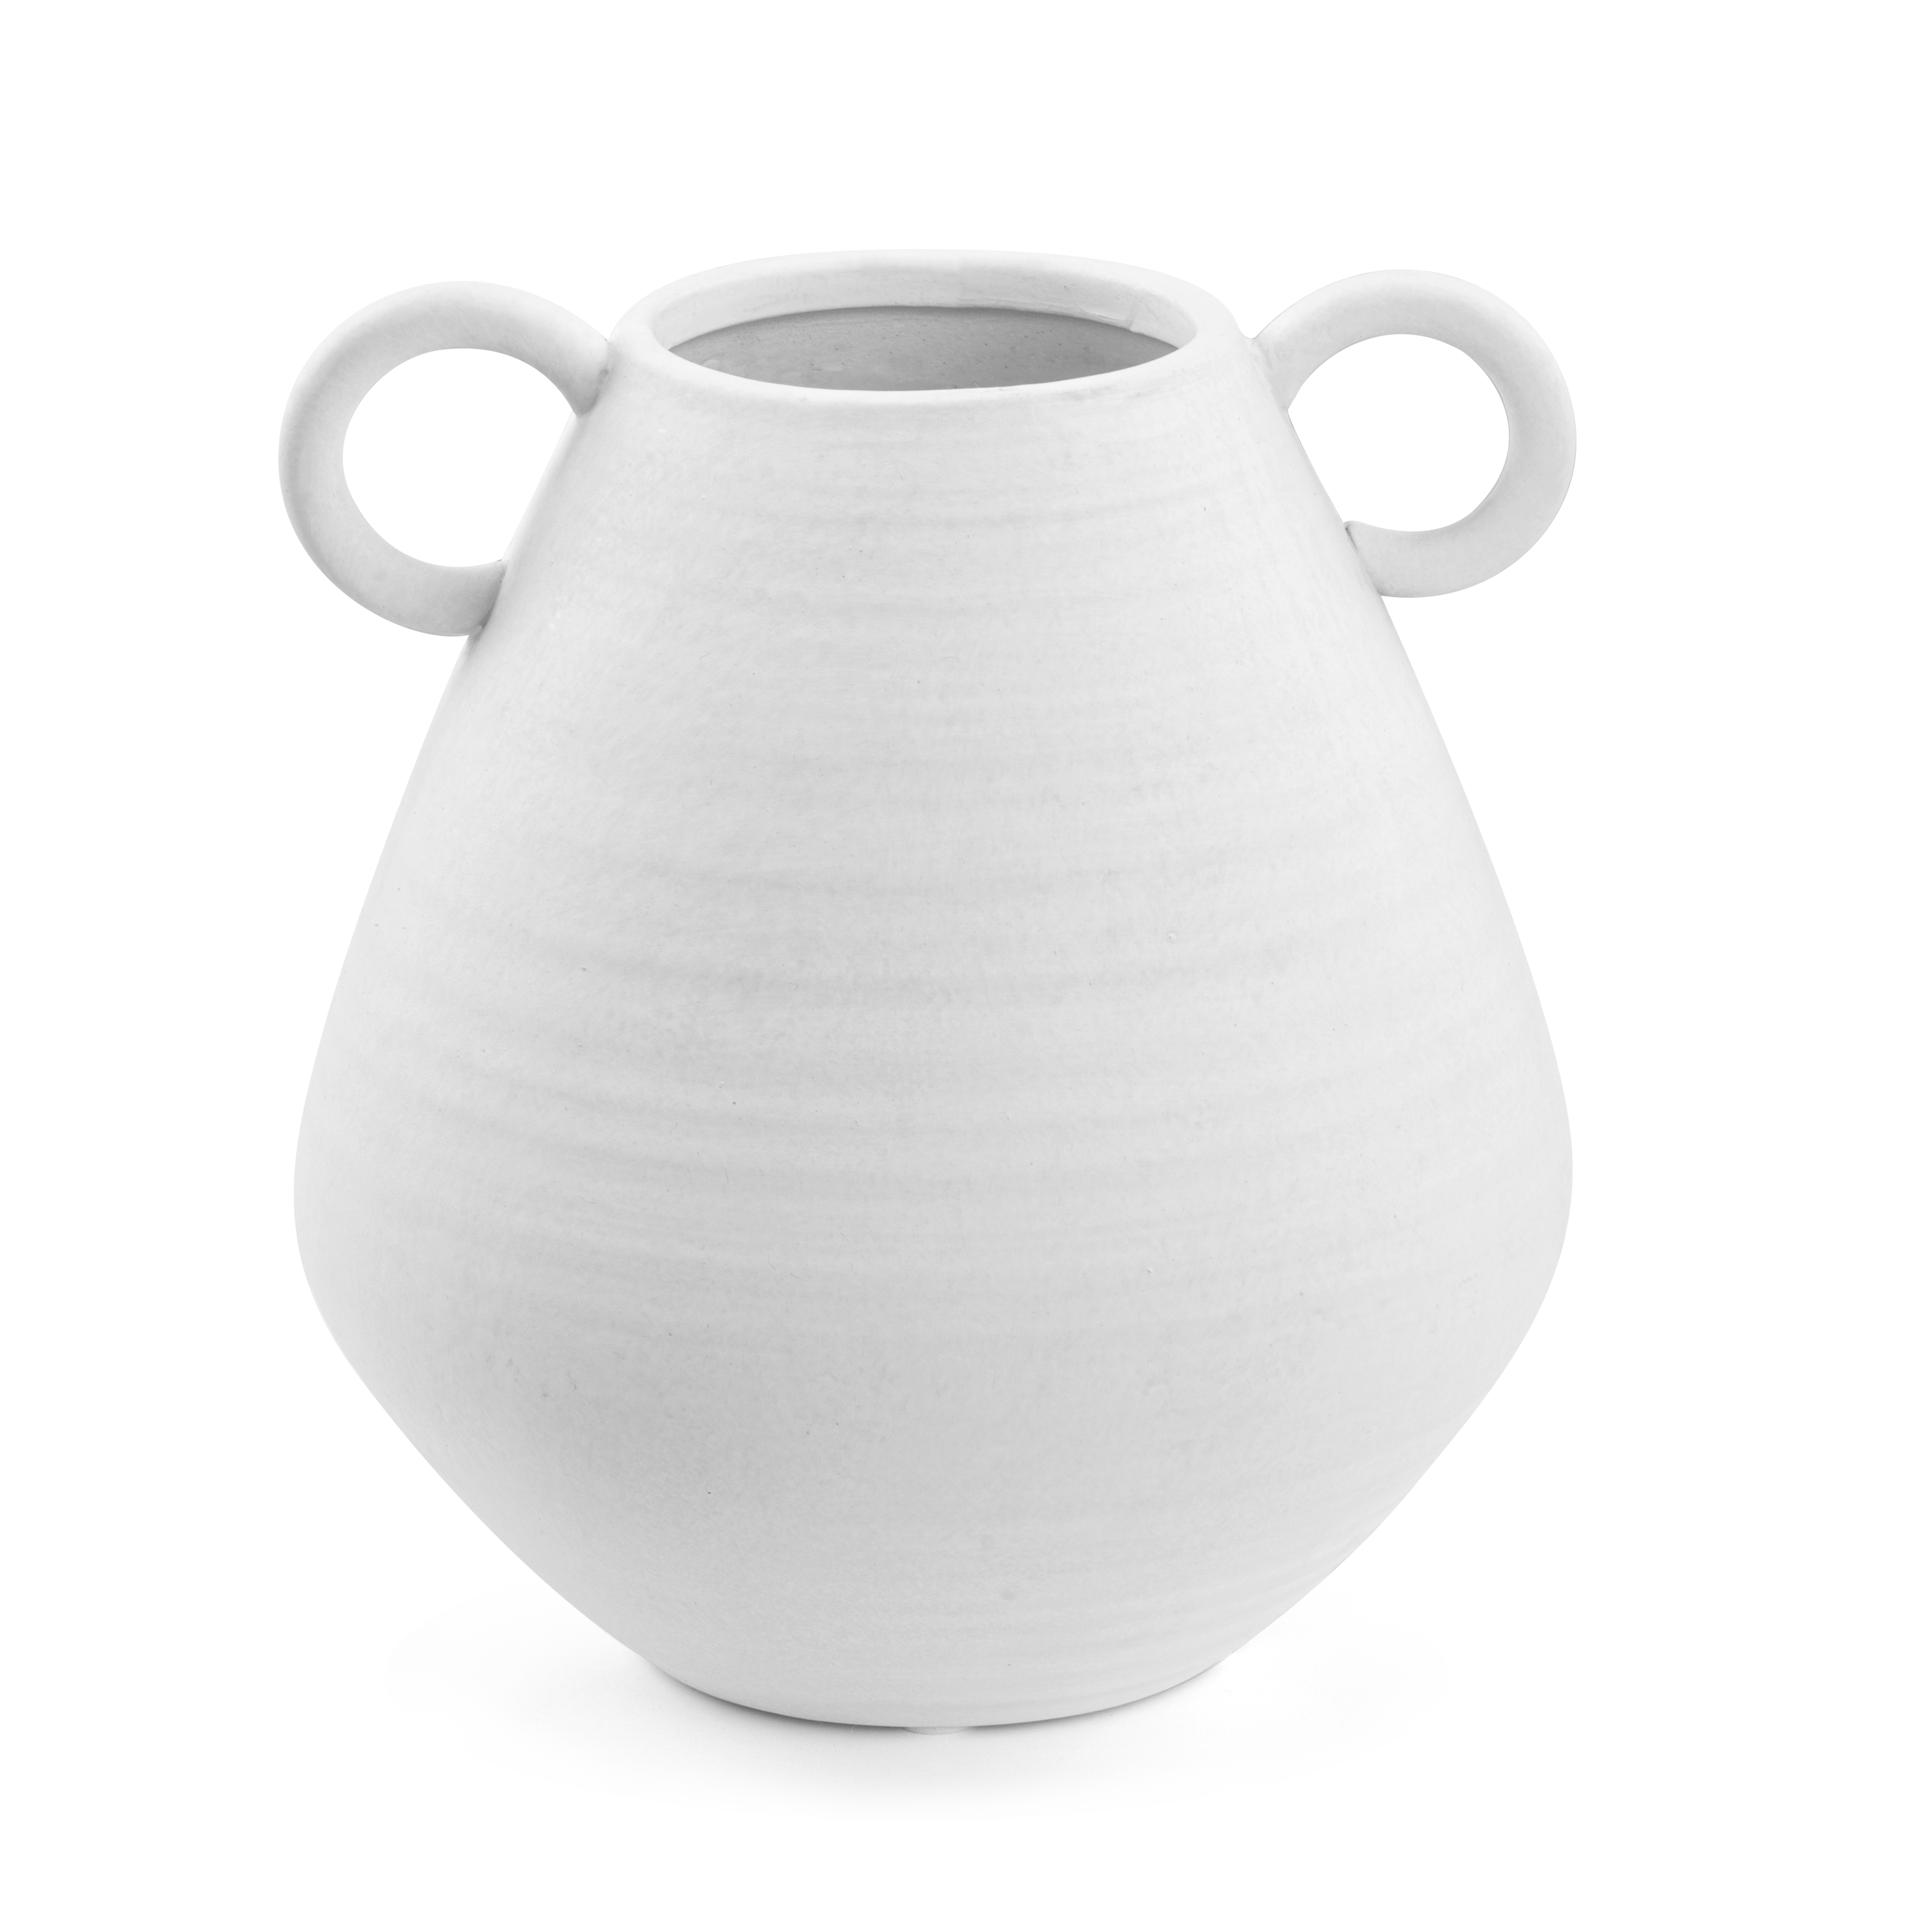 Meadow Decorative Rounded White Nordic Ceramic Vessel Vase With Handles - Antique White